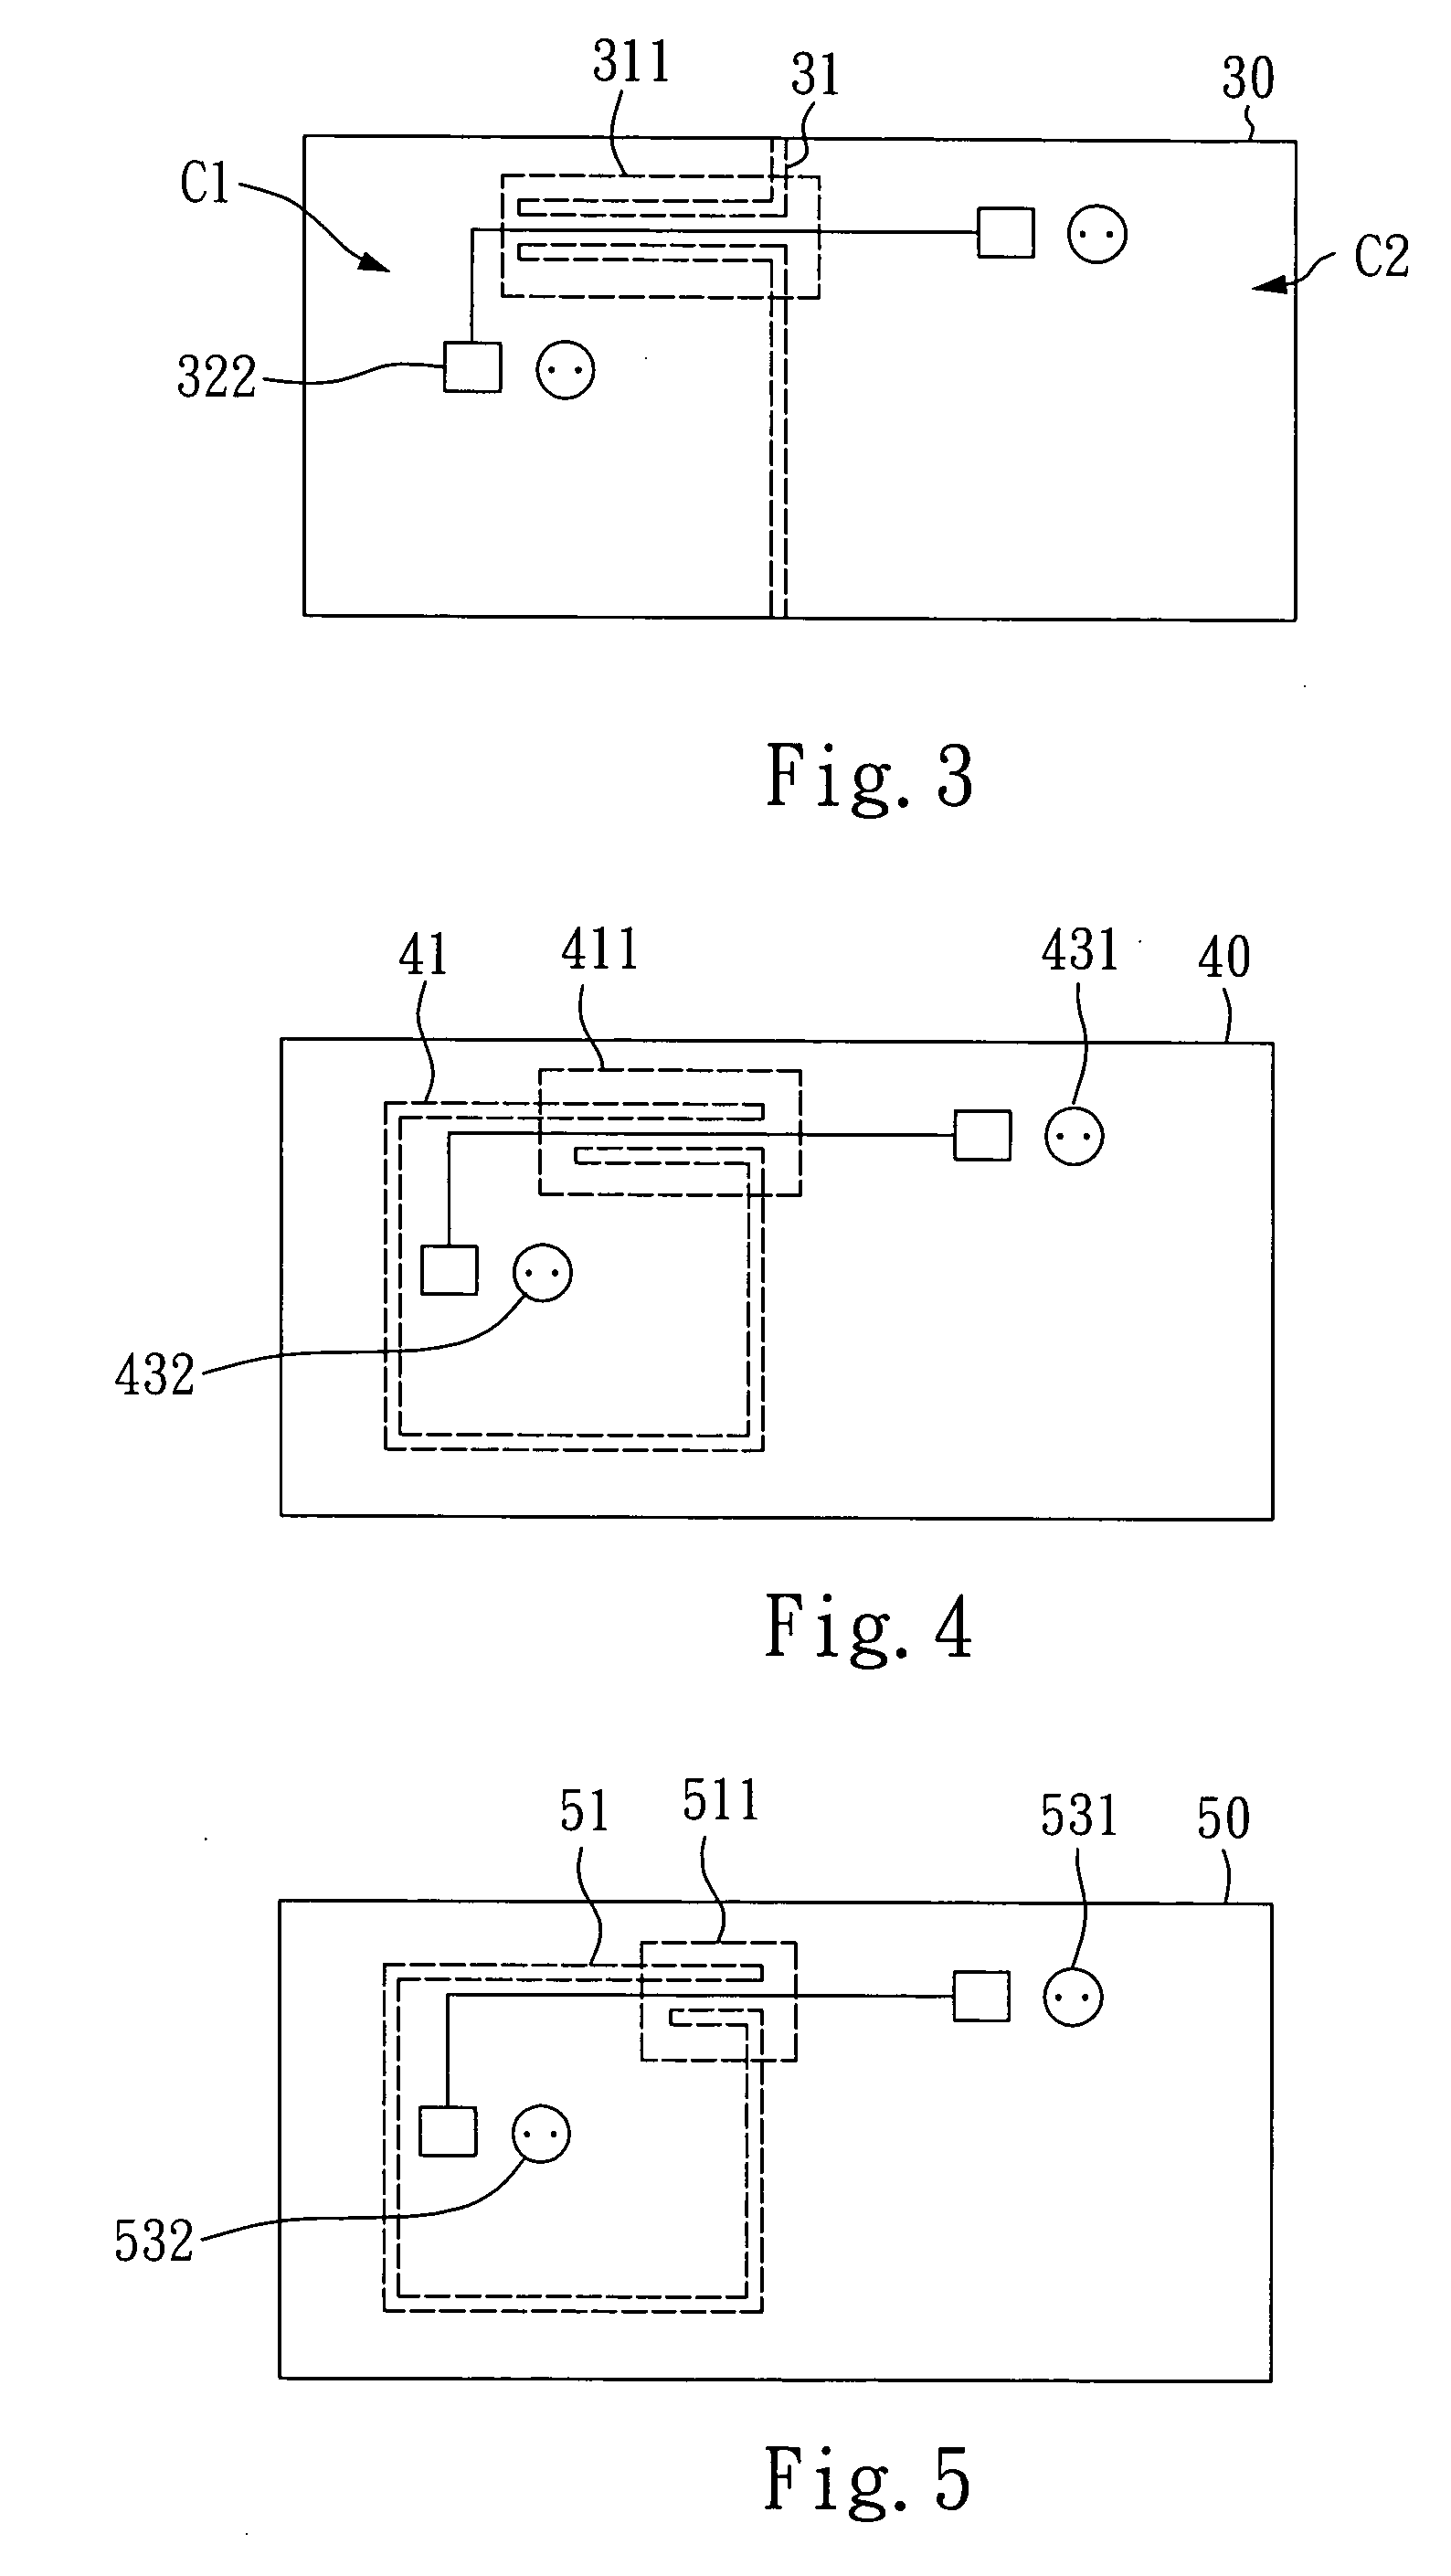 Multi-layer printed circuit with low noise